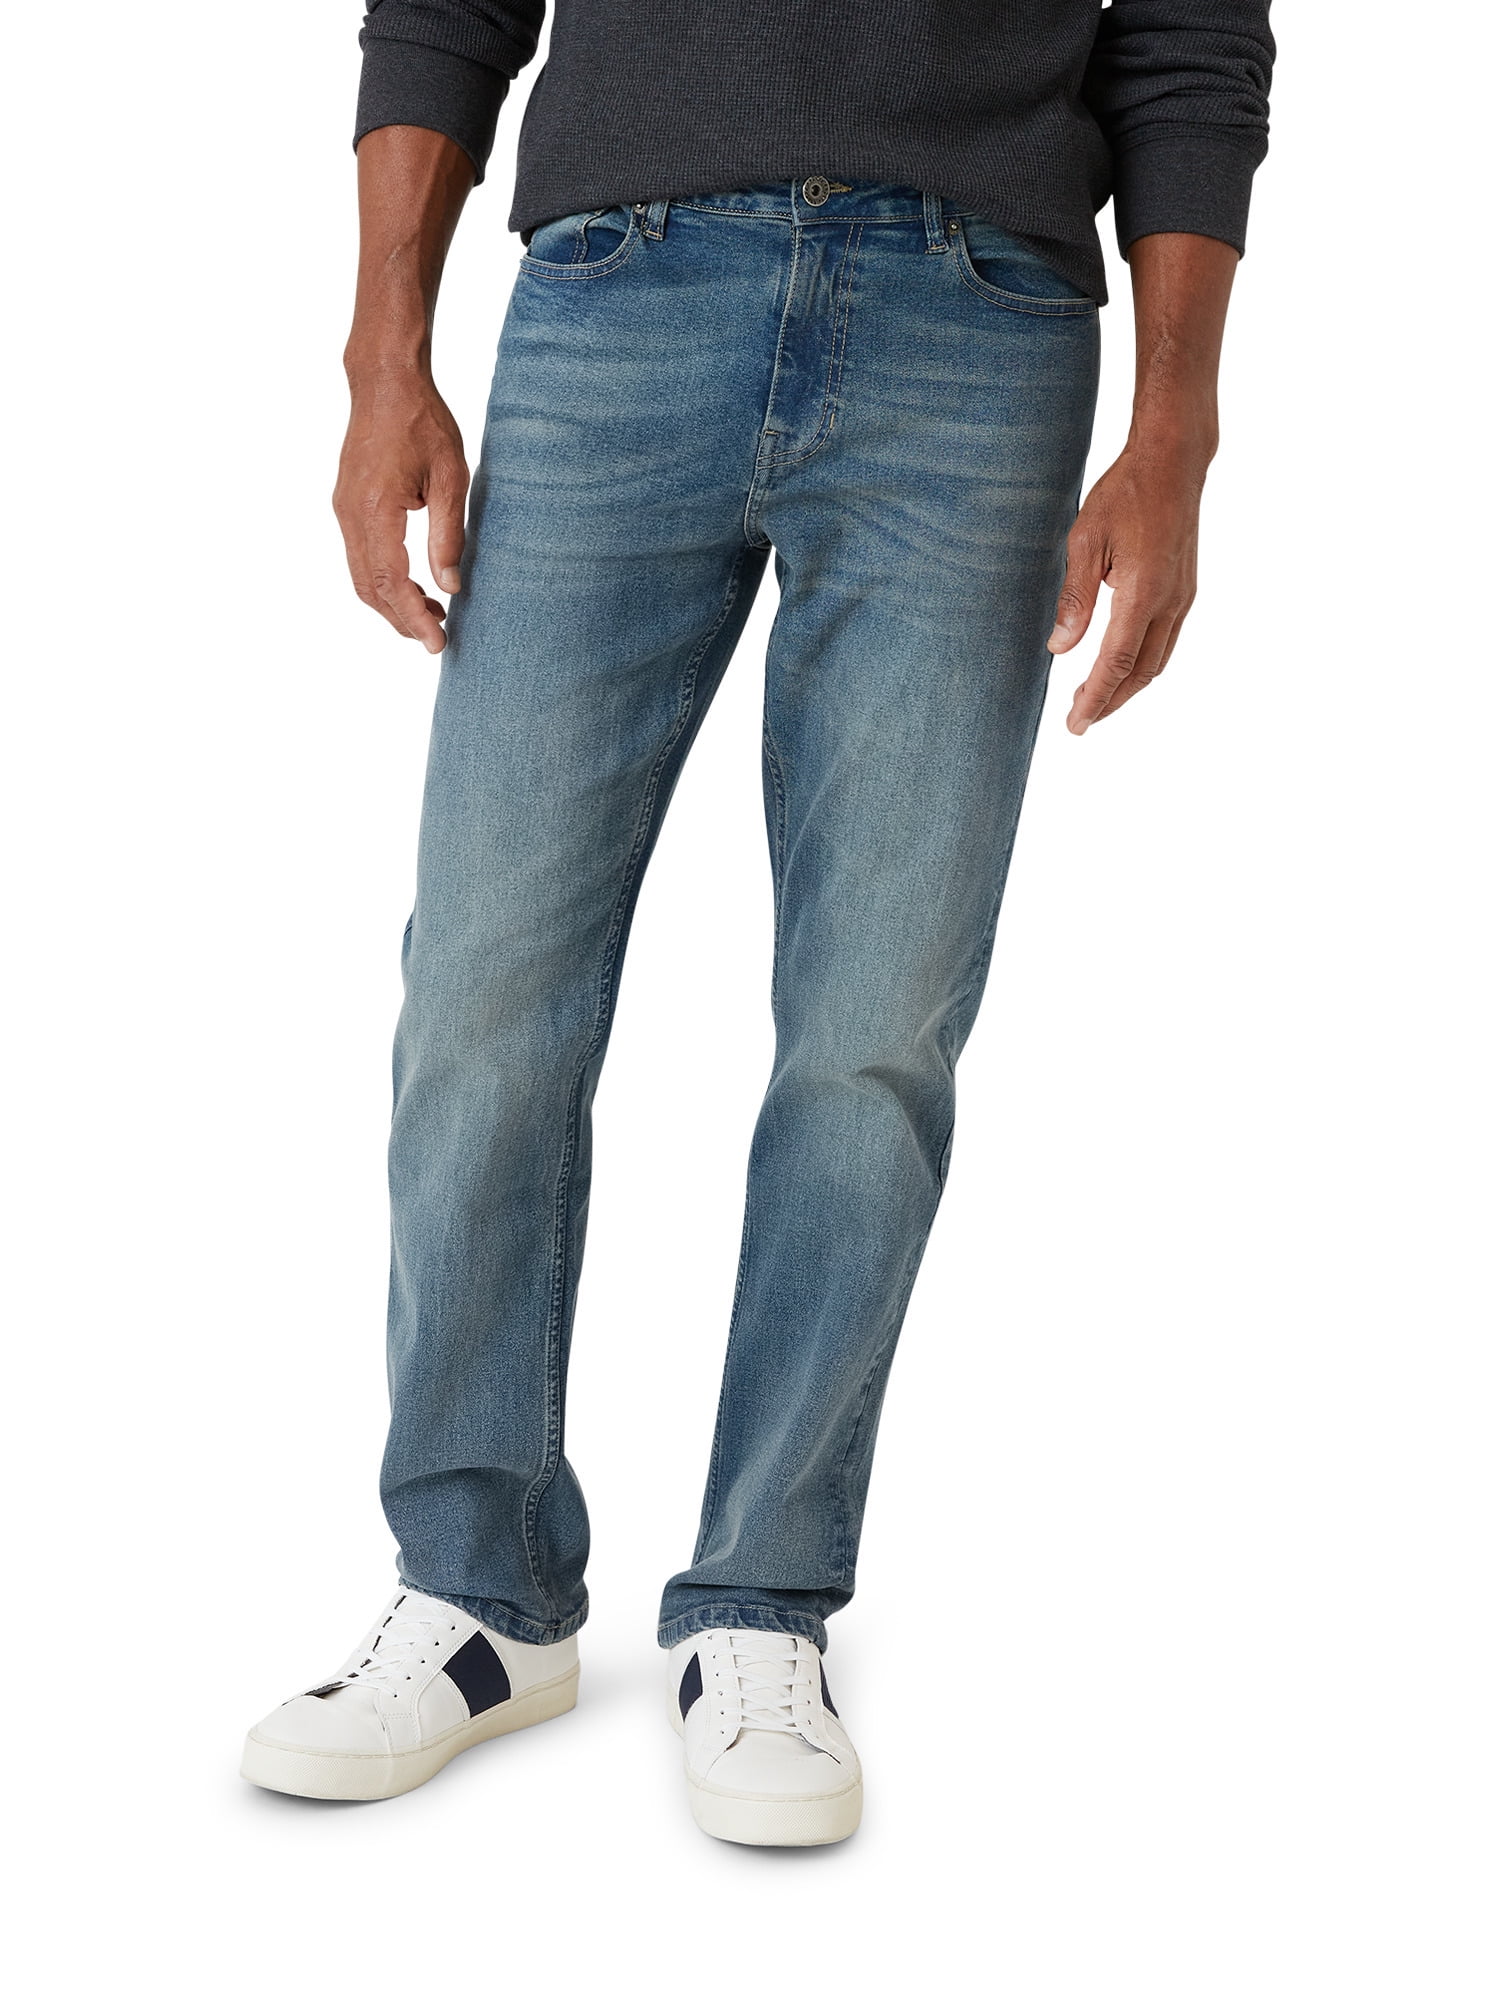 Chaps Men's Relaxed Fit Jeans - Comfort Stretch Denim Jeans - Classic Fit  Jeans for Men, Size 28W x 30L, Canal Wash at  Men's Clothing store